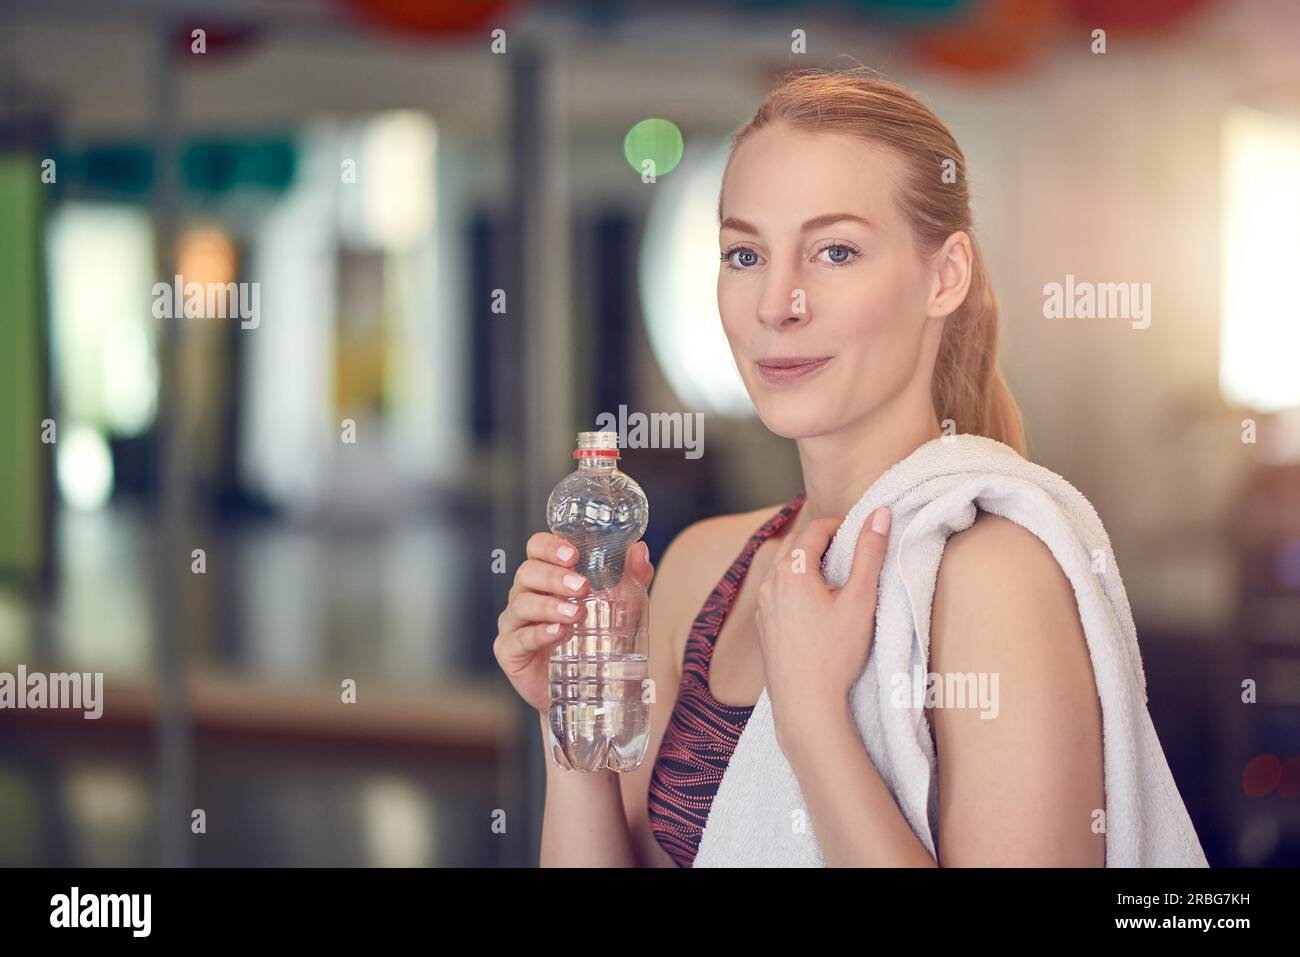 https://c8.alamy.com/comp/2RBG7KH/young-woman-athlete-drinking-bottled-water-for-hydration-after-working-out-in-a-gym-in-a-health-and-fitness-concept-2RBG7KH.jpg